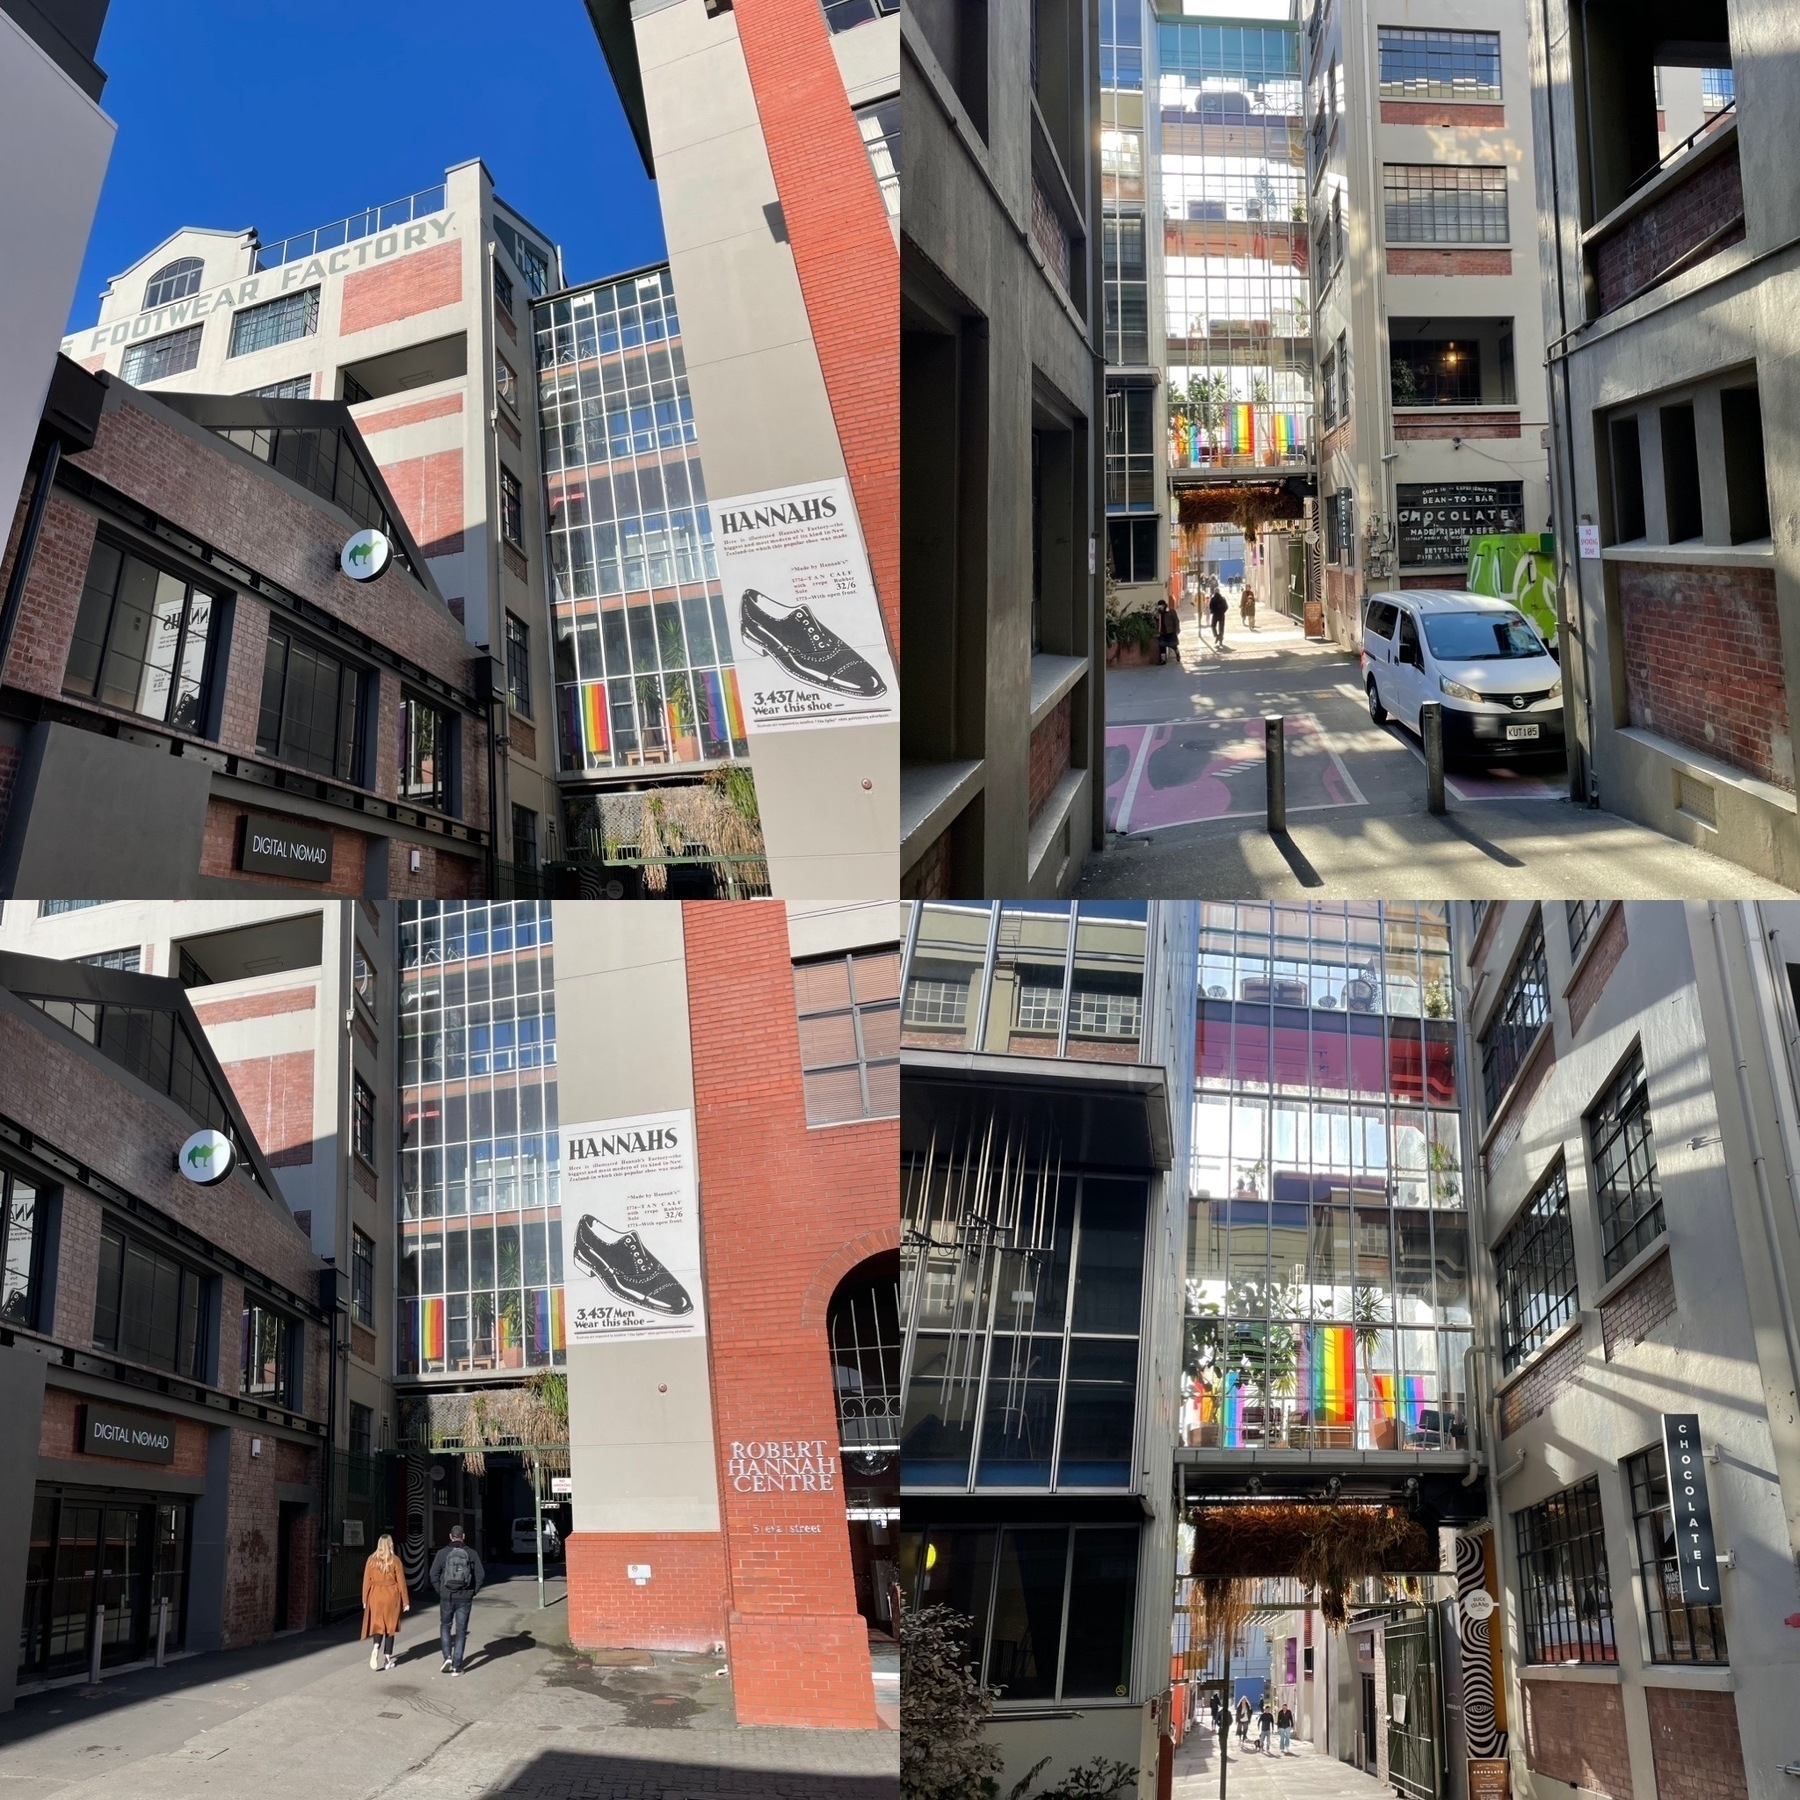 Collage of images of a sunny day on Hannah’s Laneway, including the Rainbow Bridge 🌈